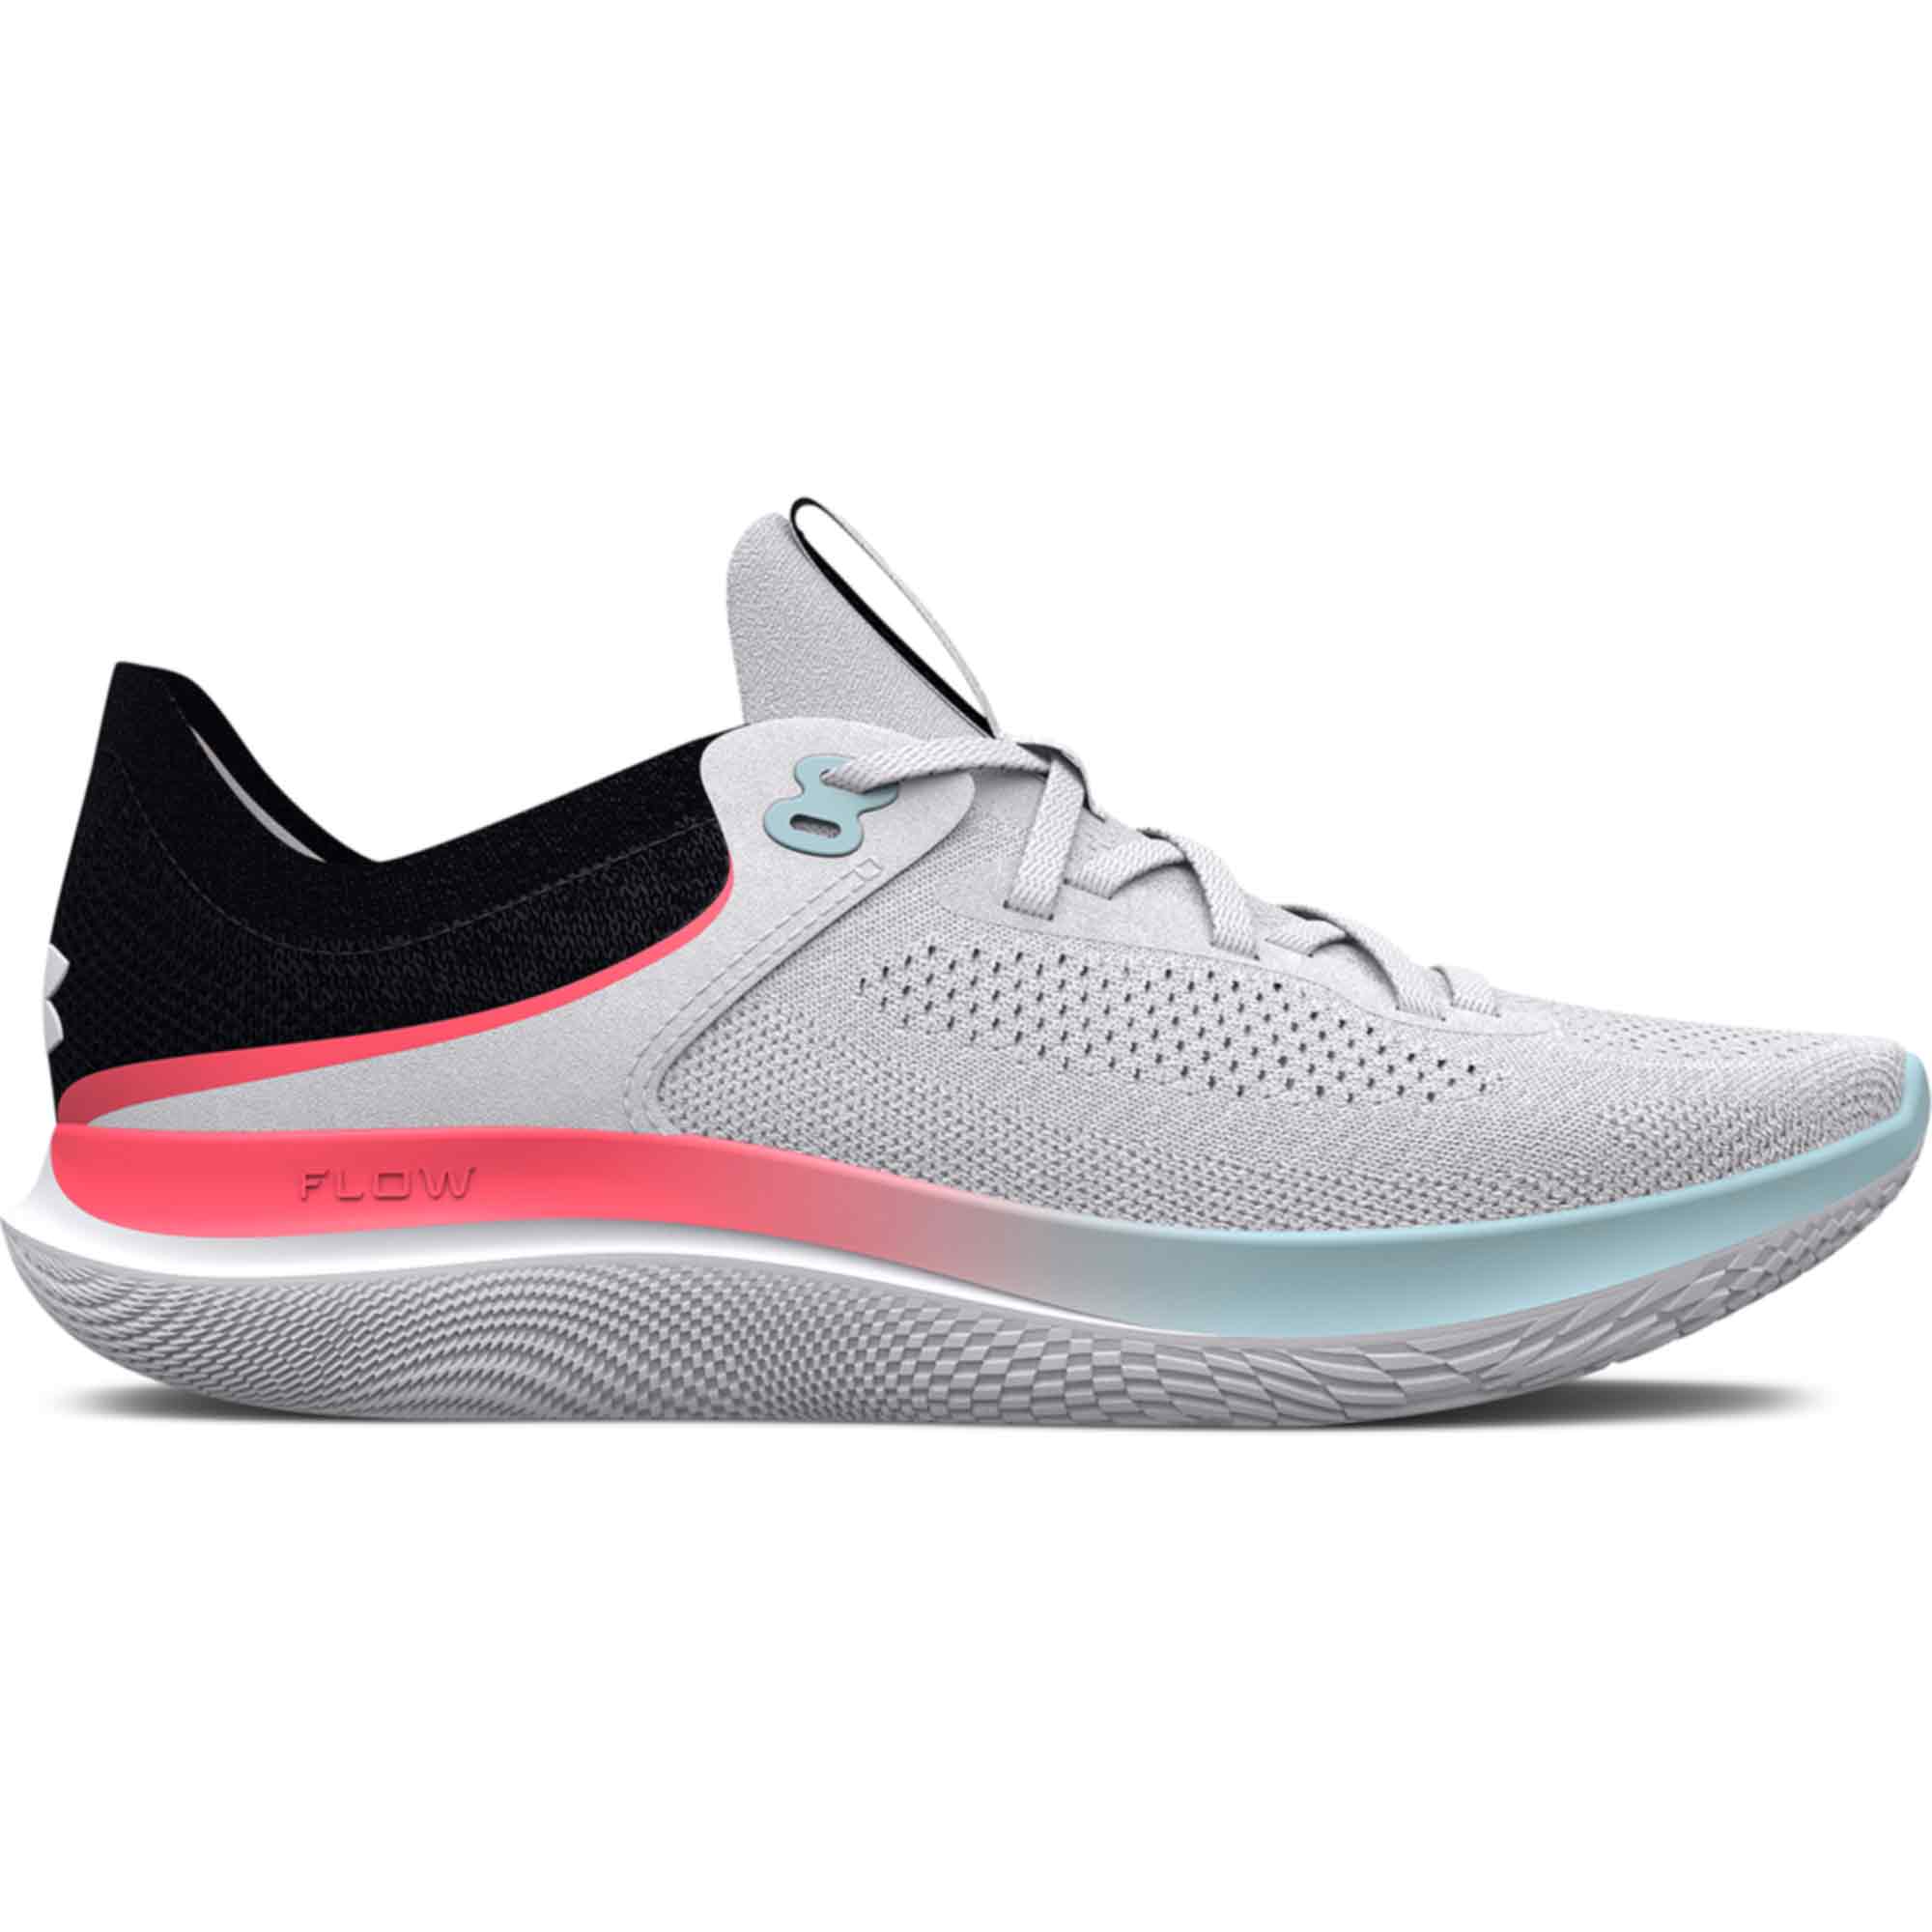 Under Armour Womens Flow Synchronicity Running Shoes | Rebel Sport